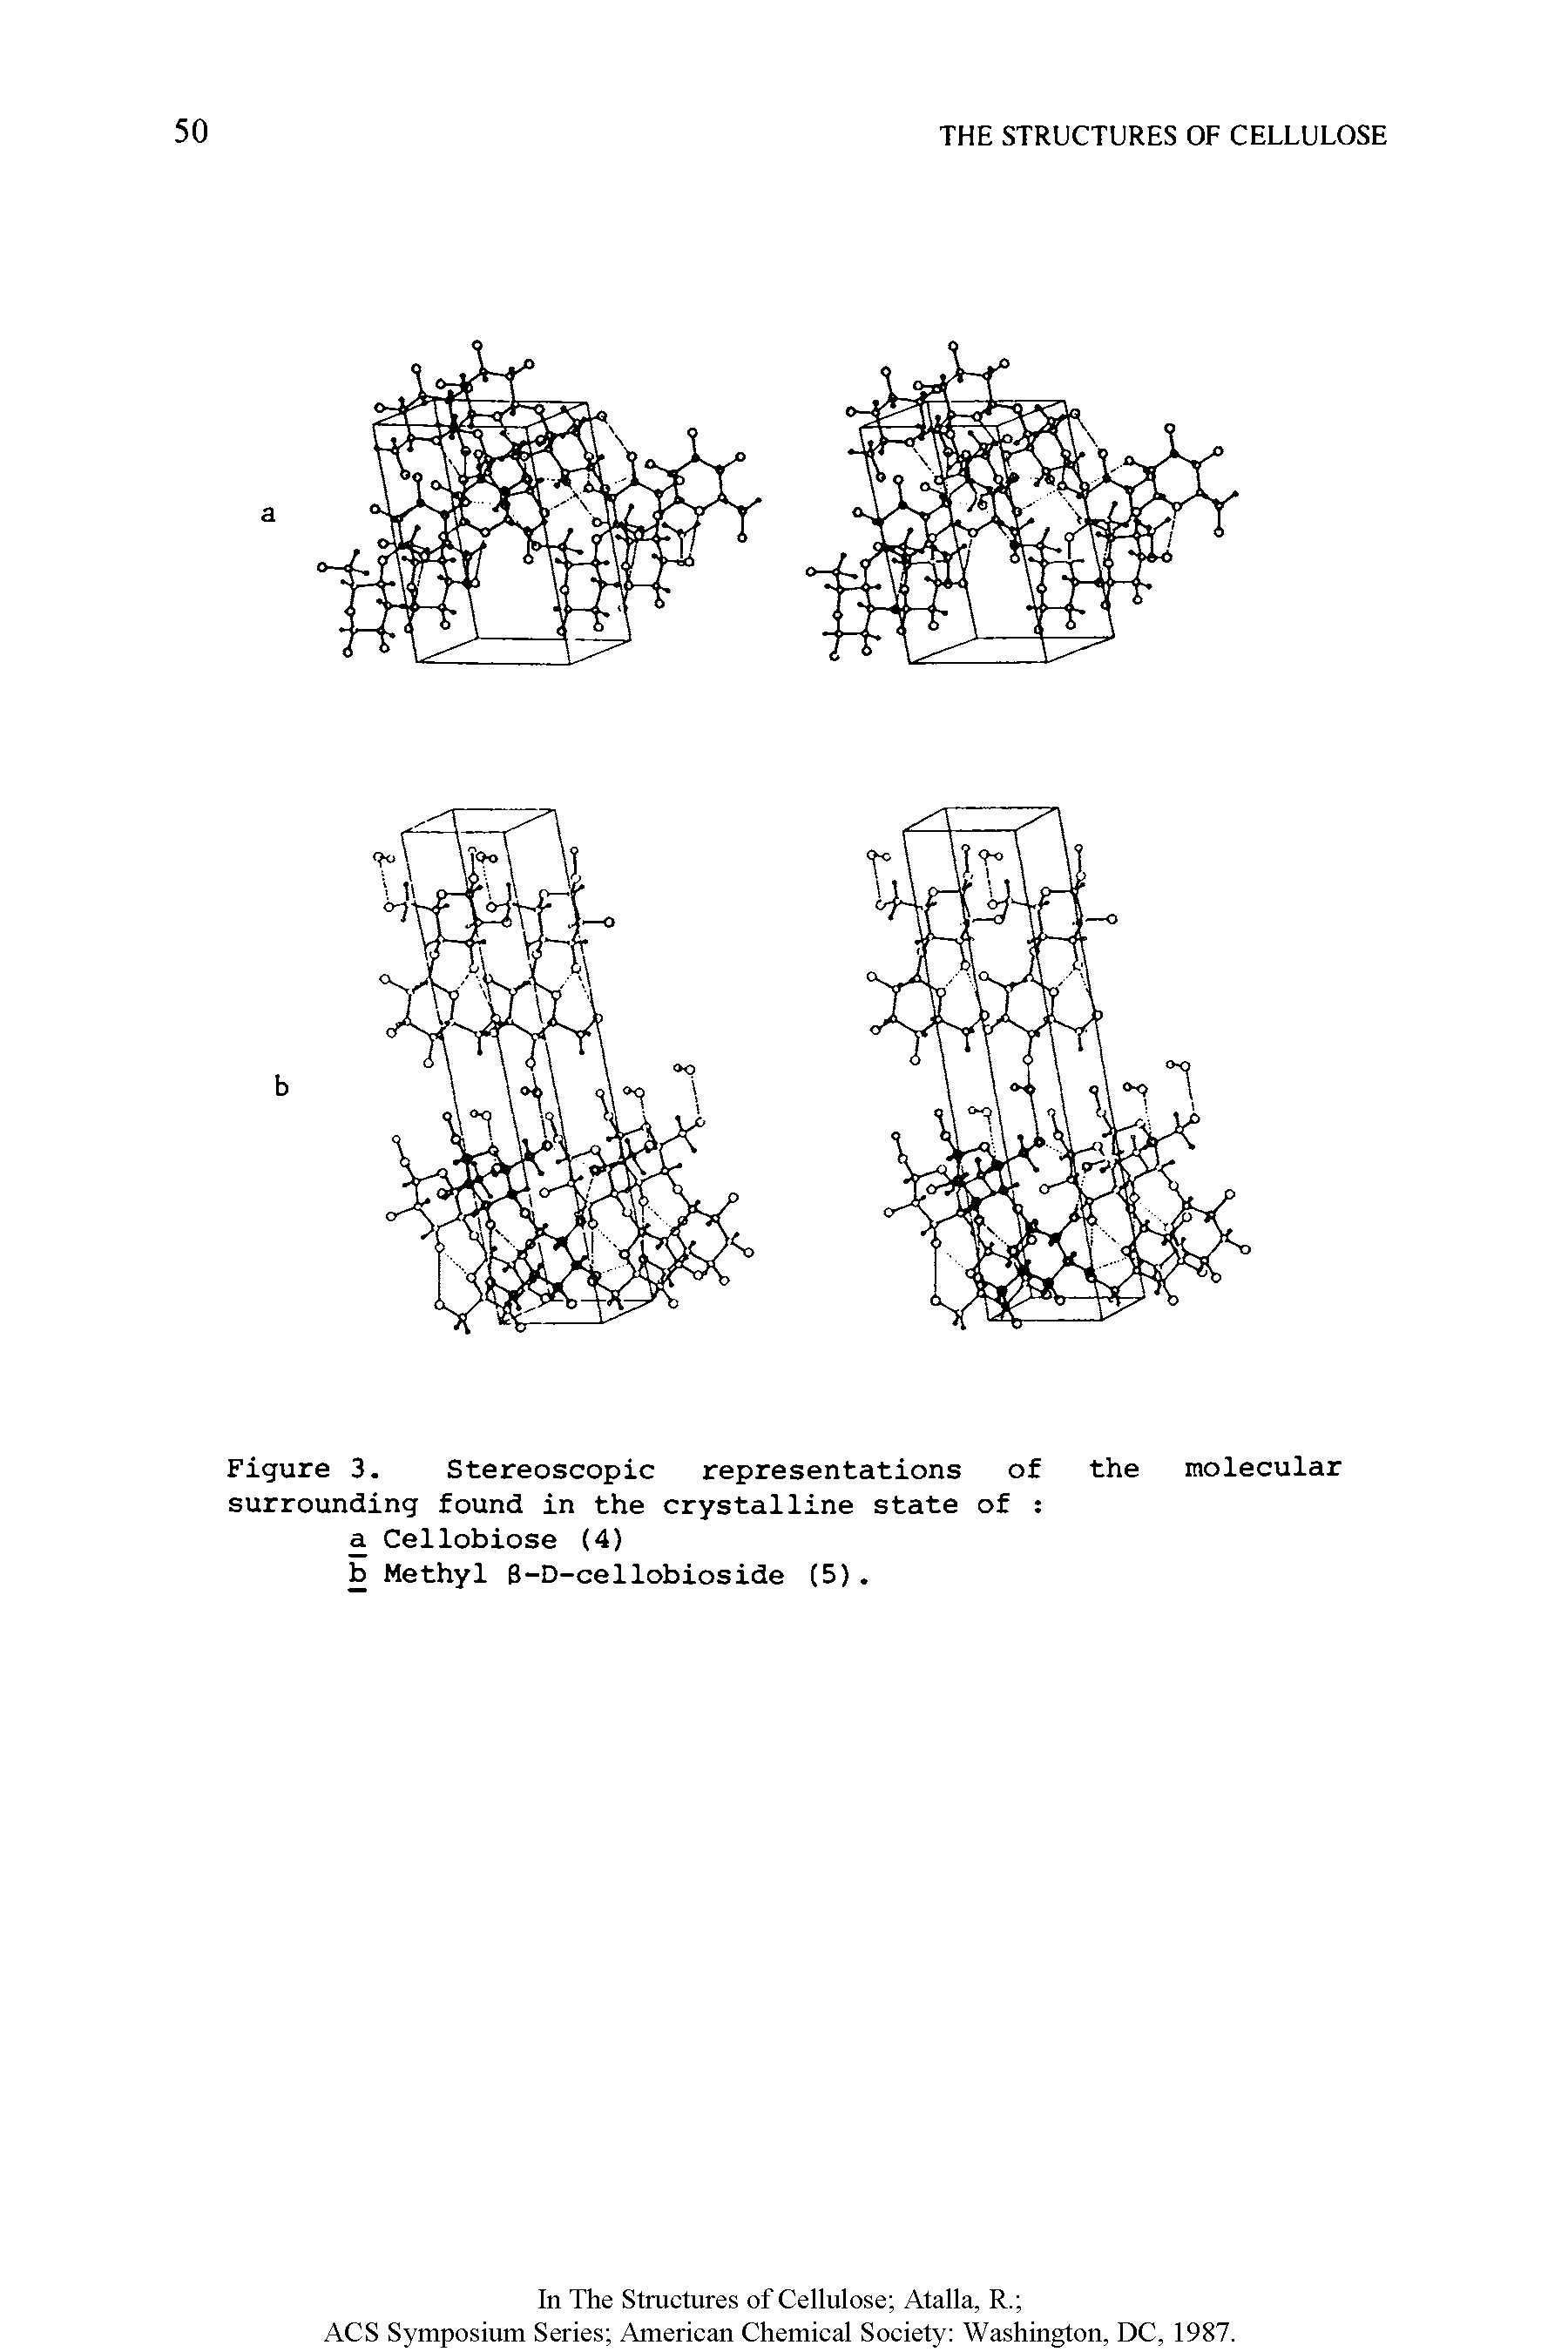 Figure 3. Stereoscopic representations of surrounding found in the crystalline state of a Cellobiose (4) b Methyl B-D-cellobioside (5).